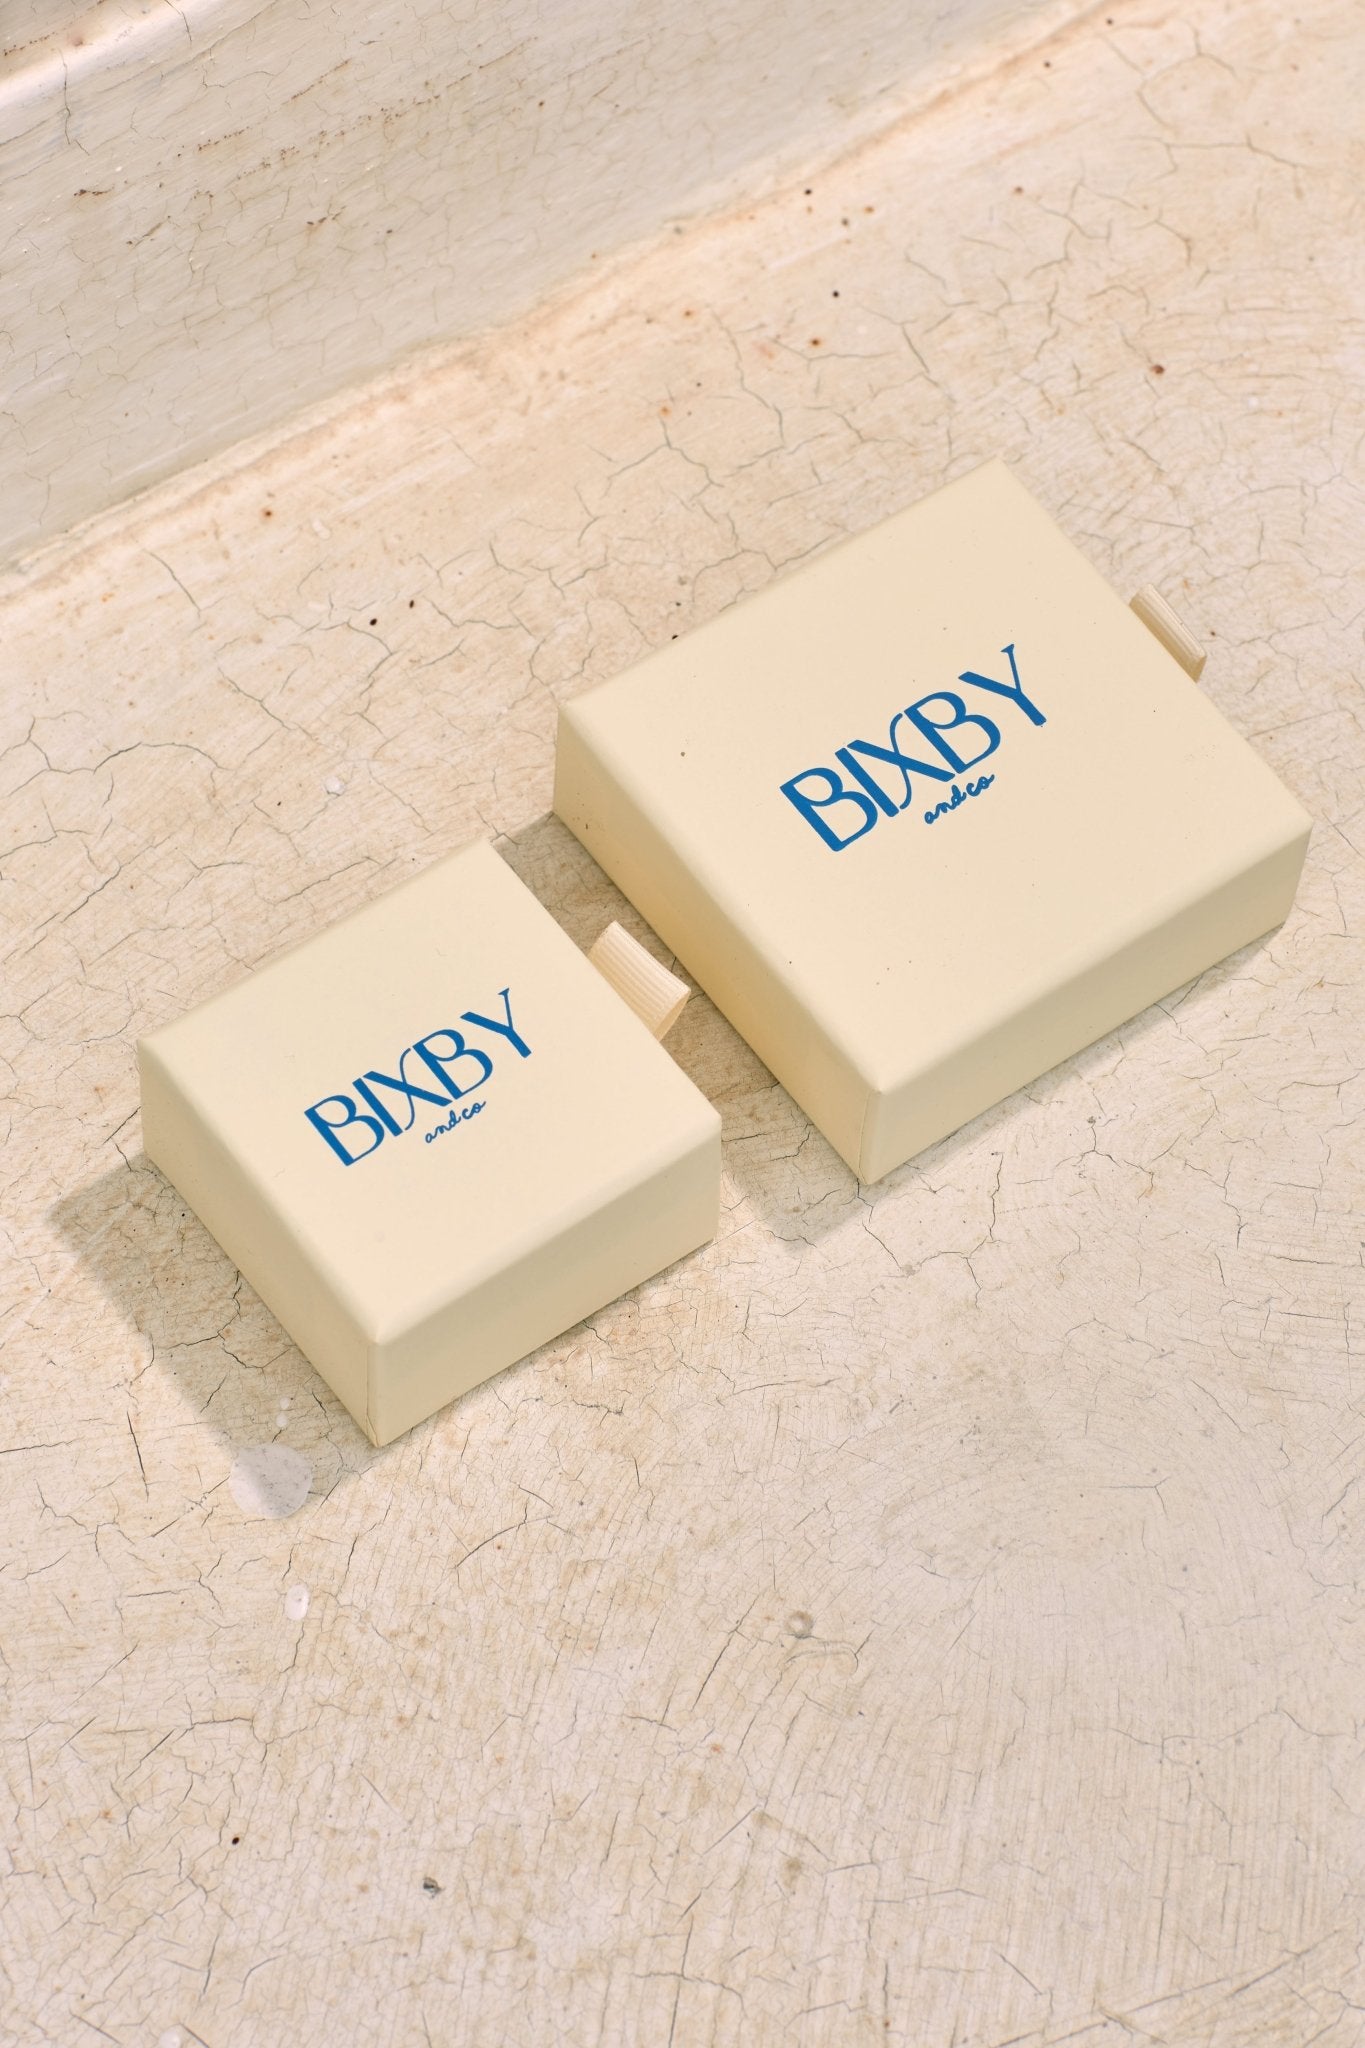 Bixby and Co jewellery packaging